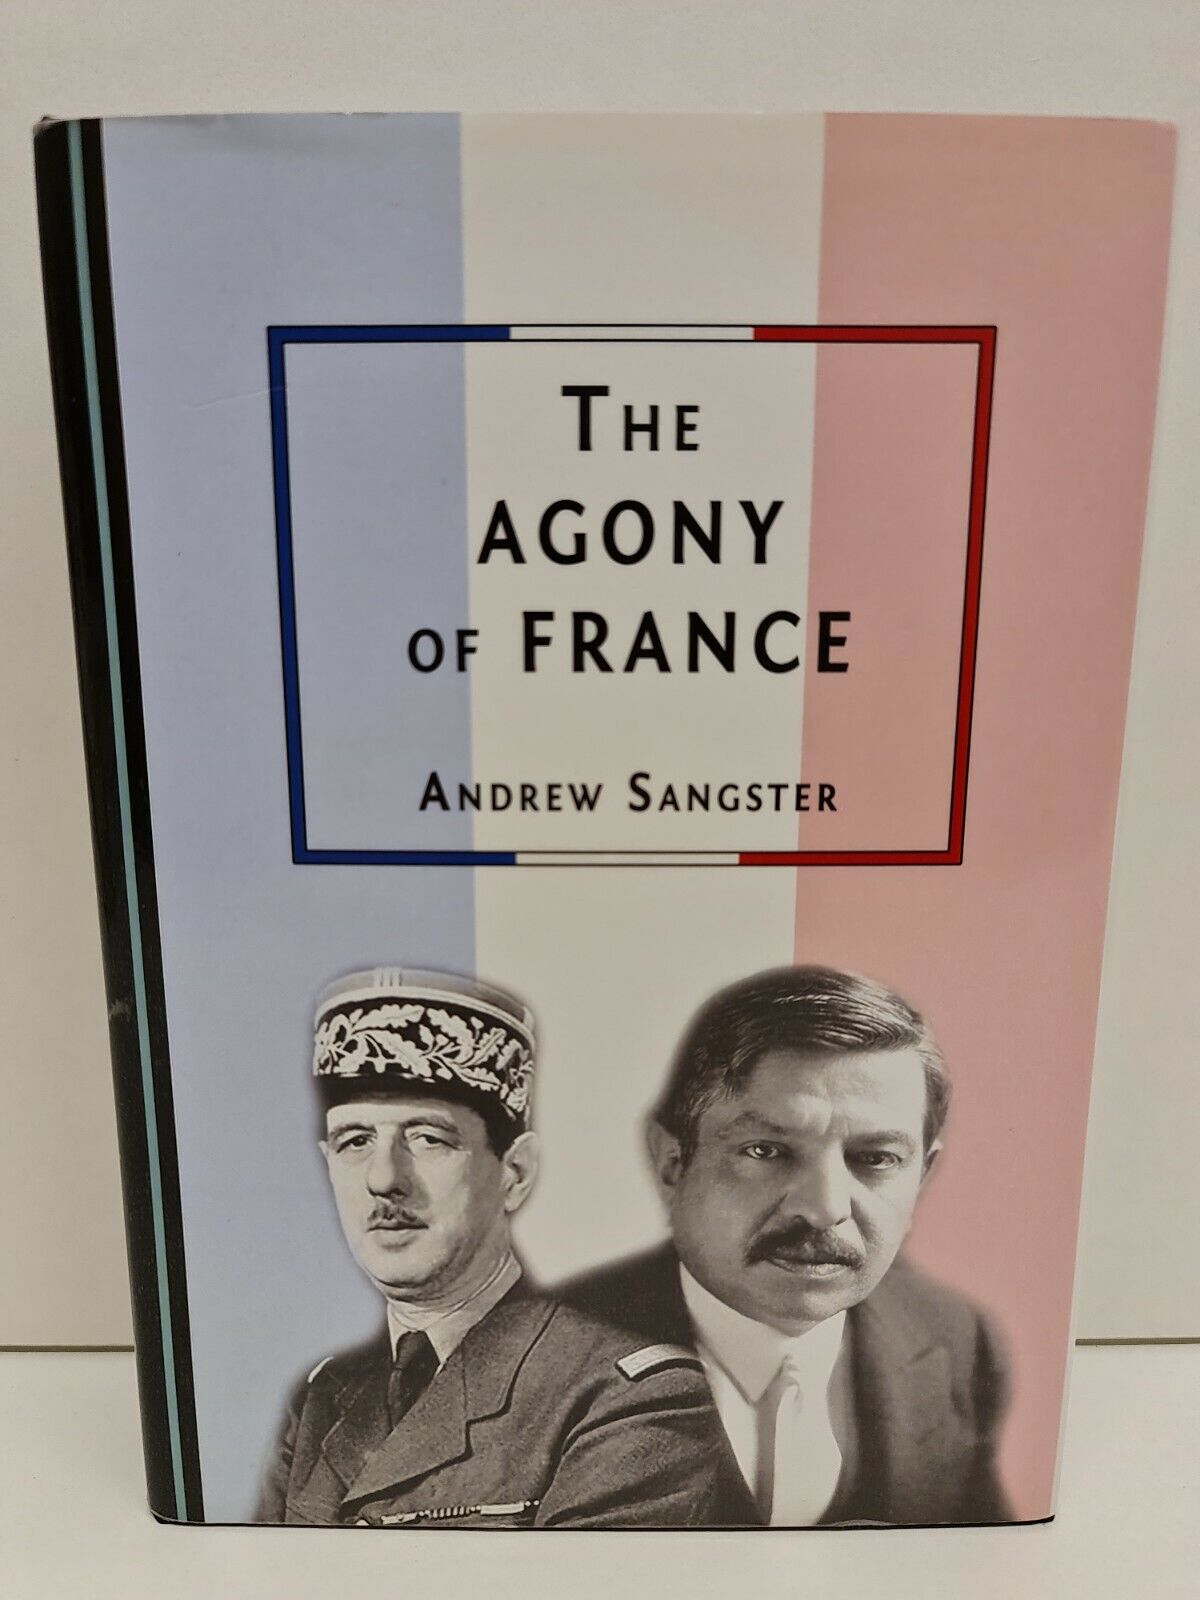 The Agony of France by Andrew Sangster ( 2016)